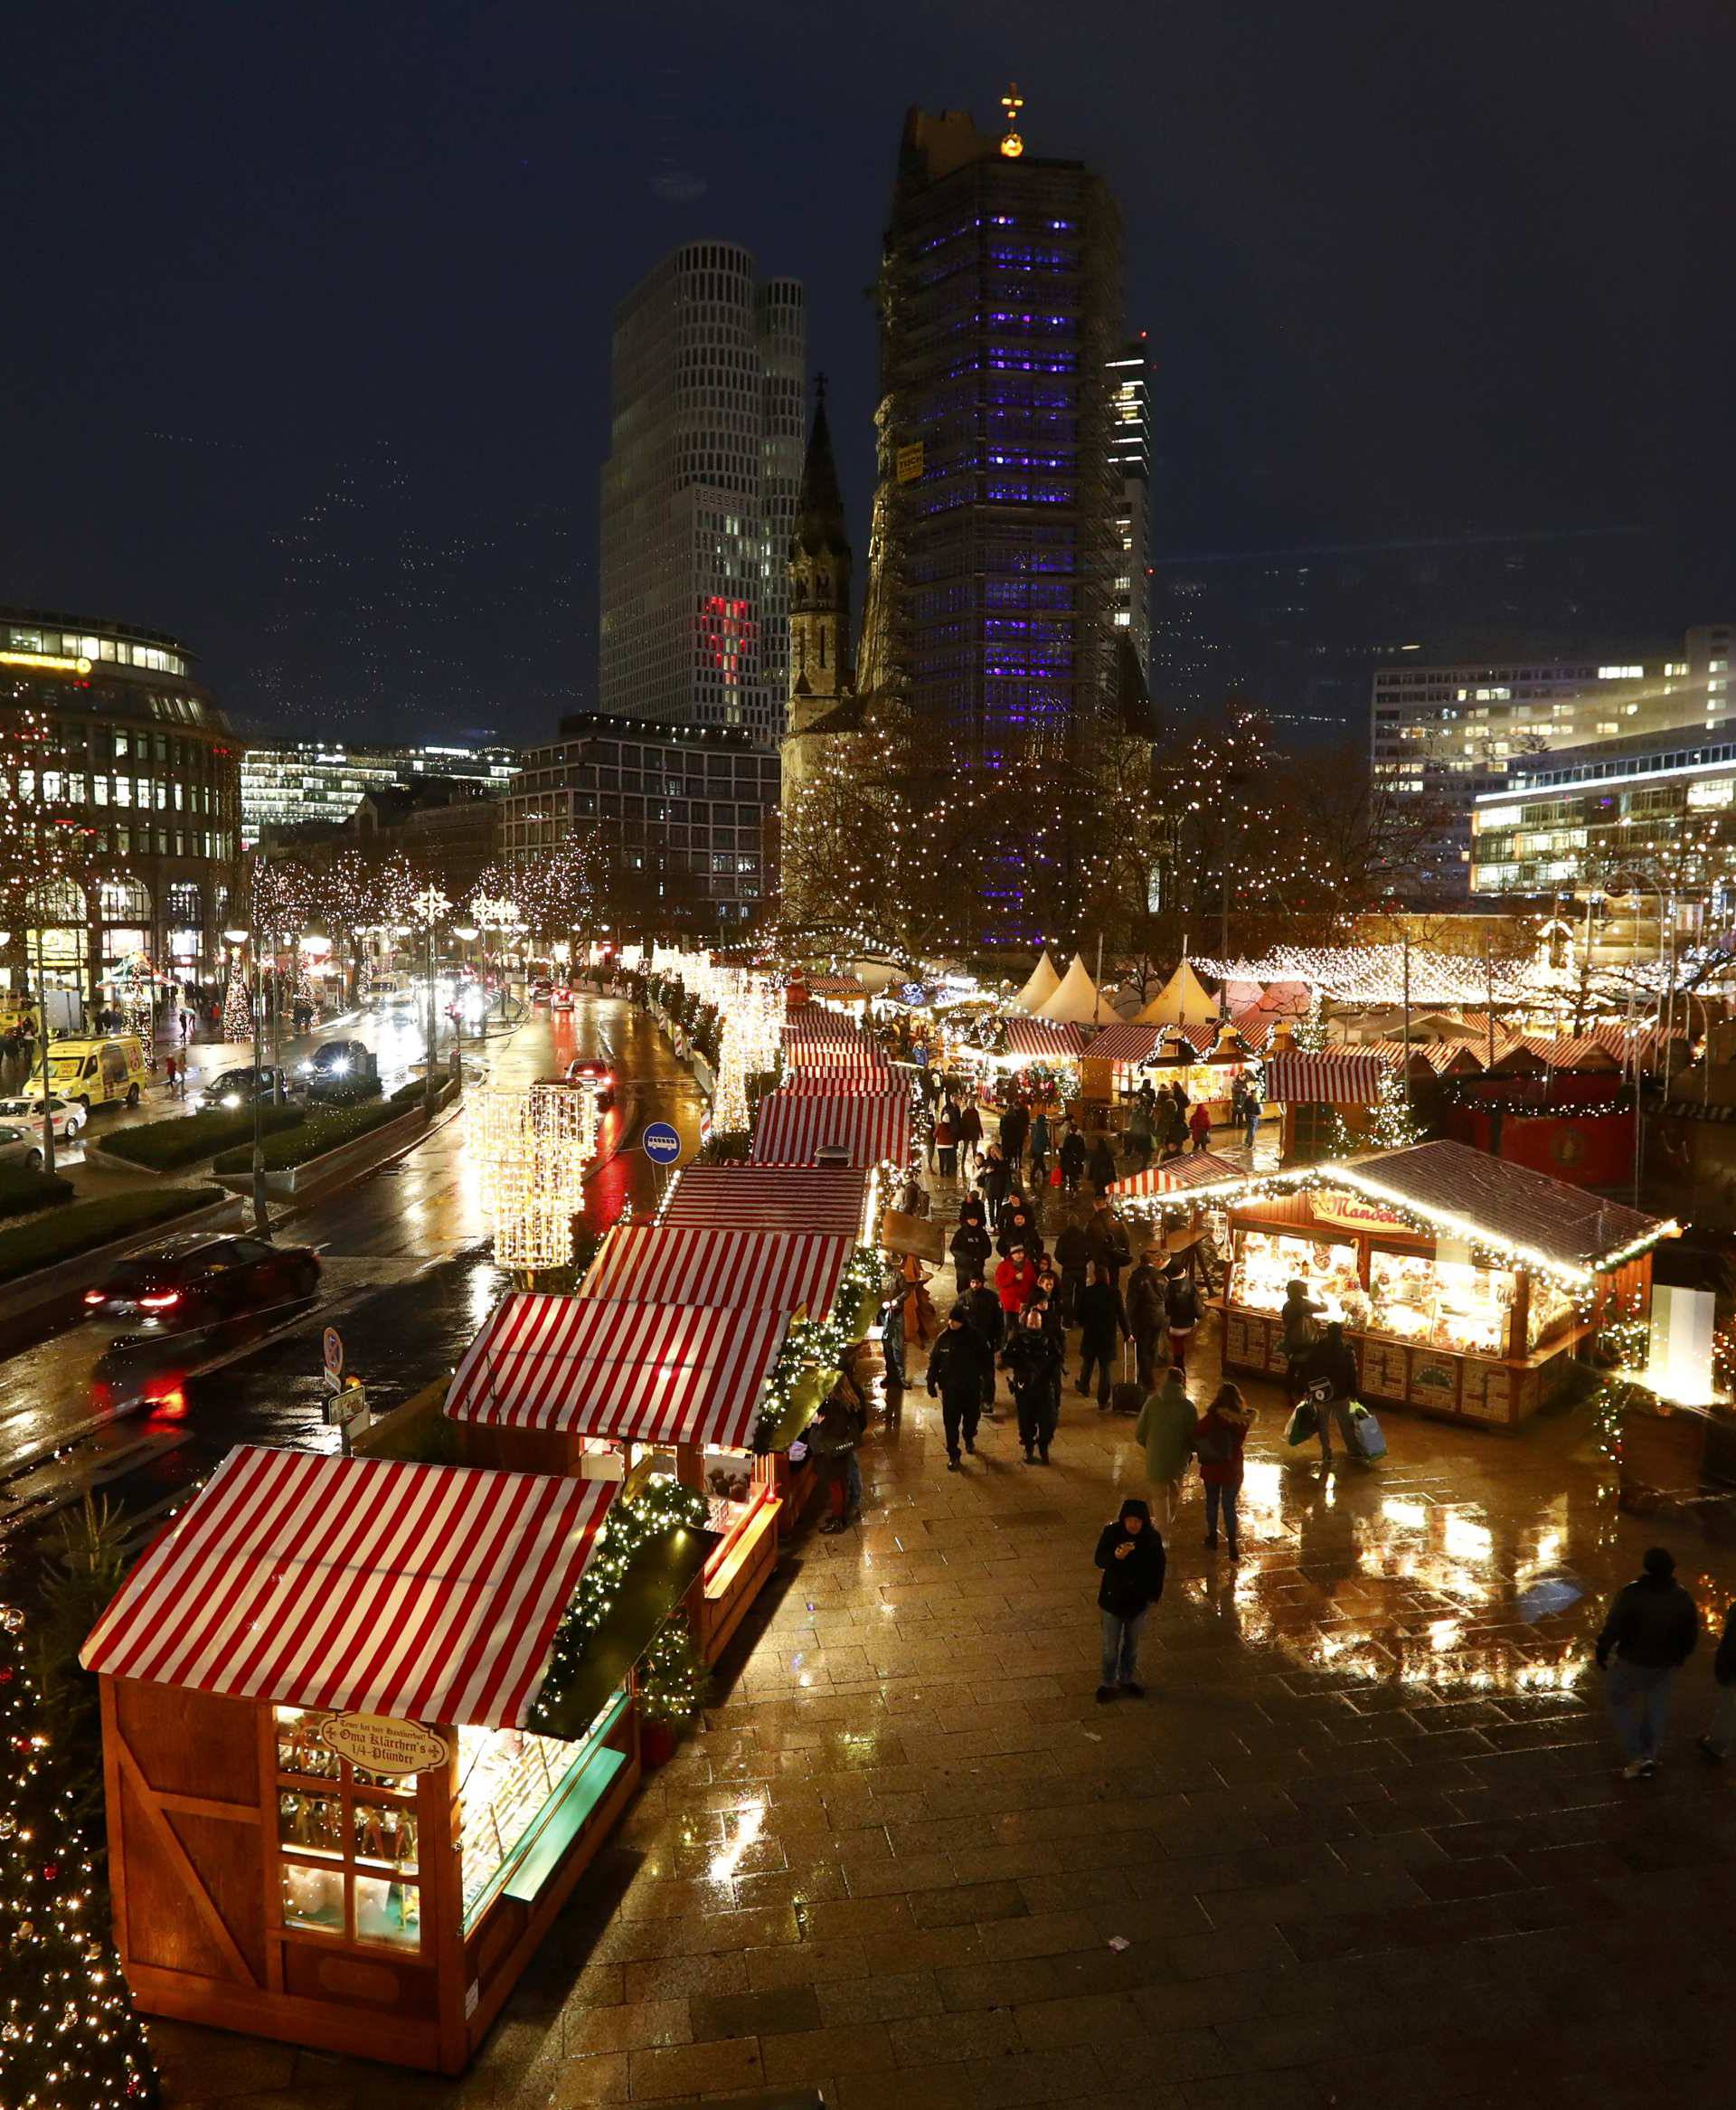 Picture shows the re-opened Christmas market at Breitscheid square in Berlin